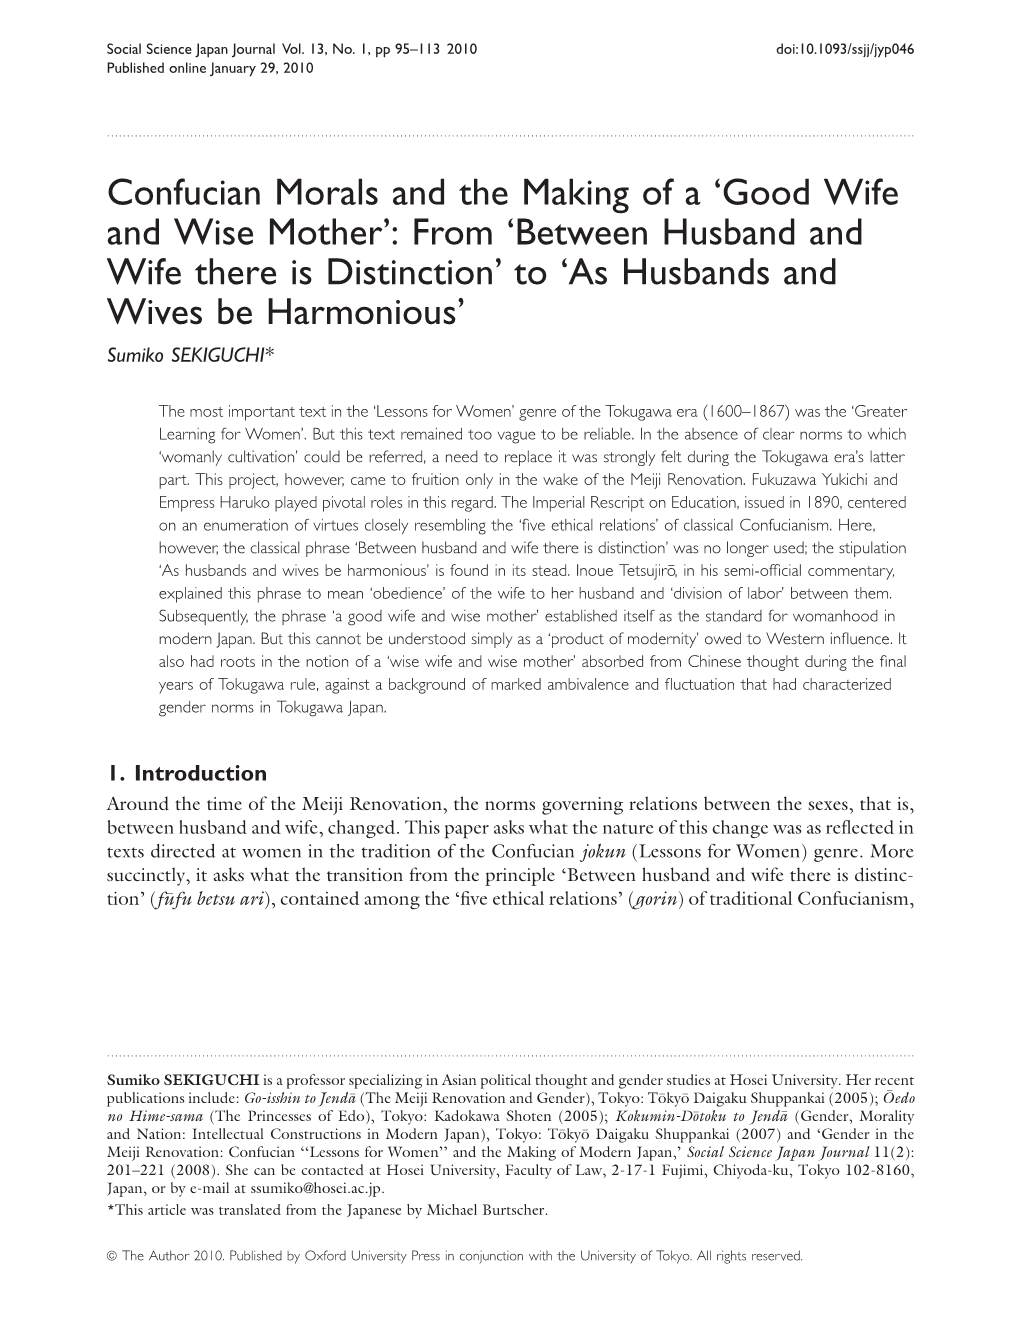 Confucian Morals and the Making of a 'Good Wife and Wise